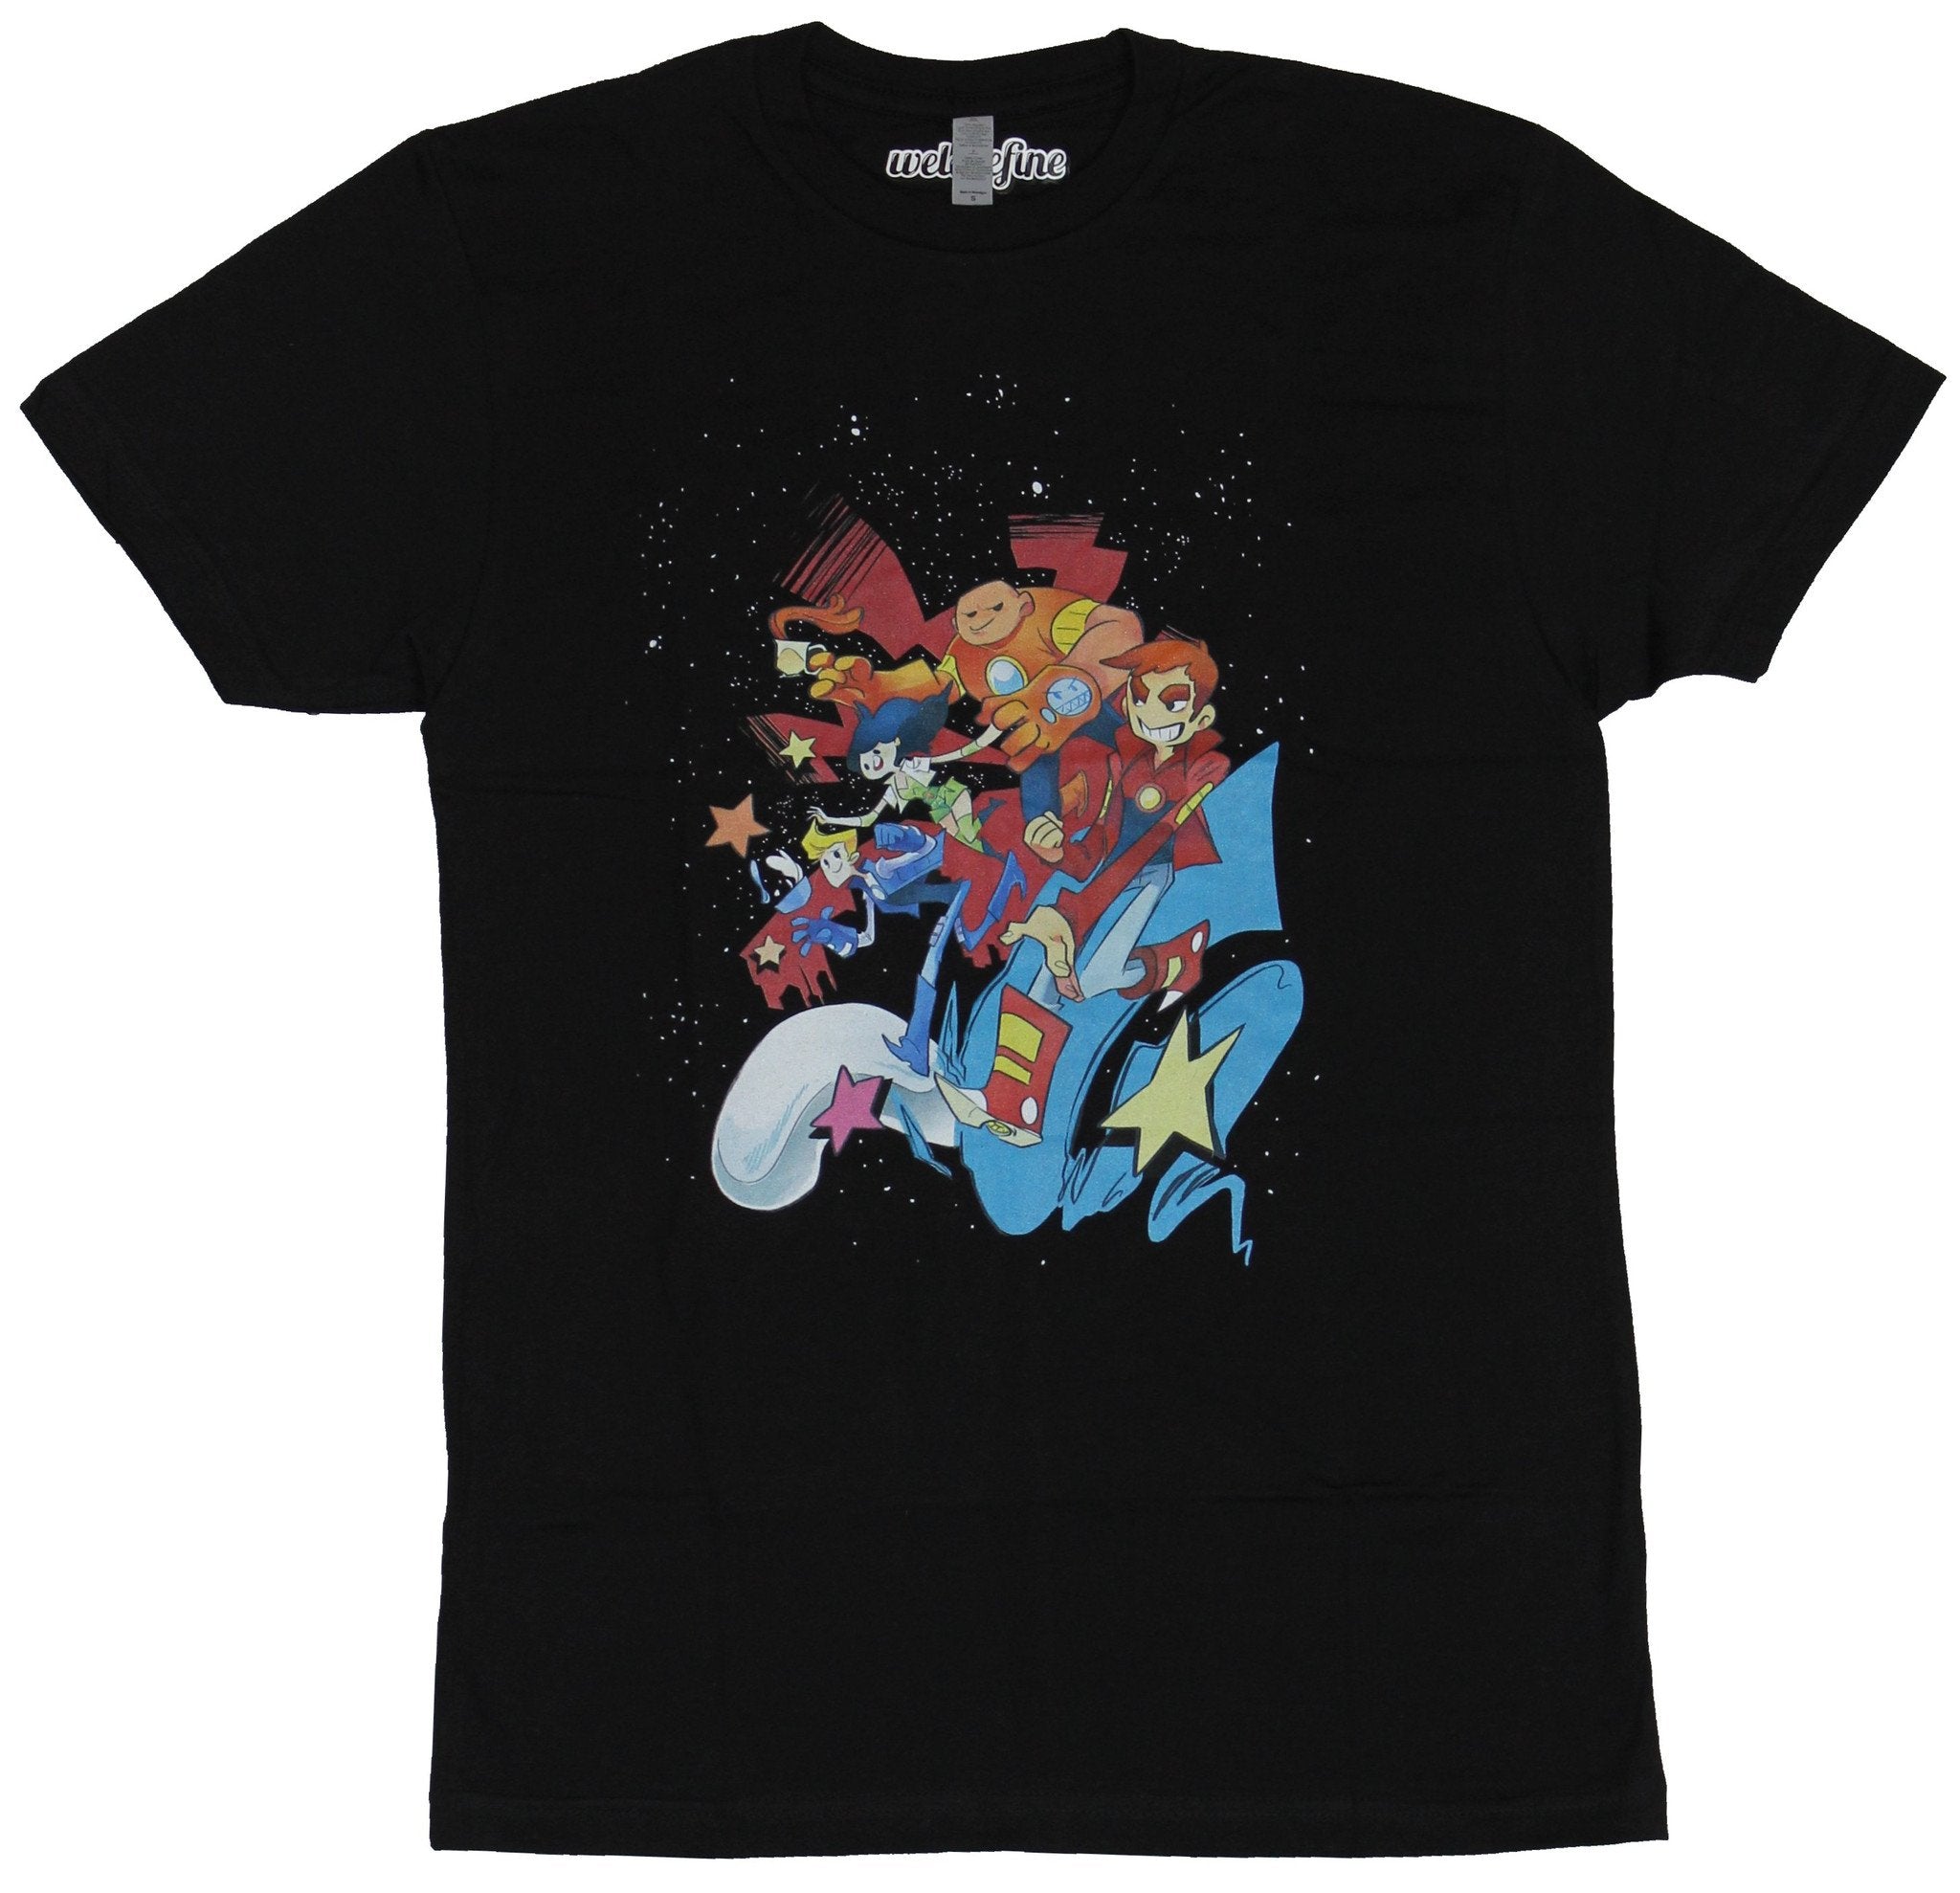 The Bravest Warriors Mens T-Shirt - Spacey Colorful Team Charge Image